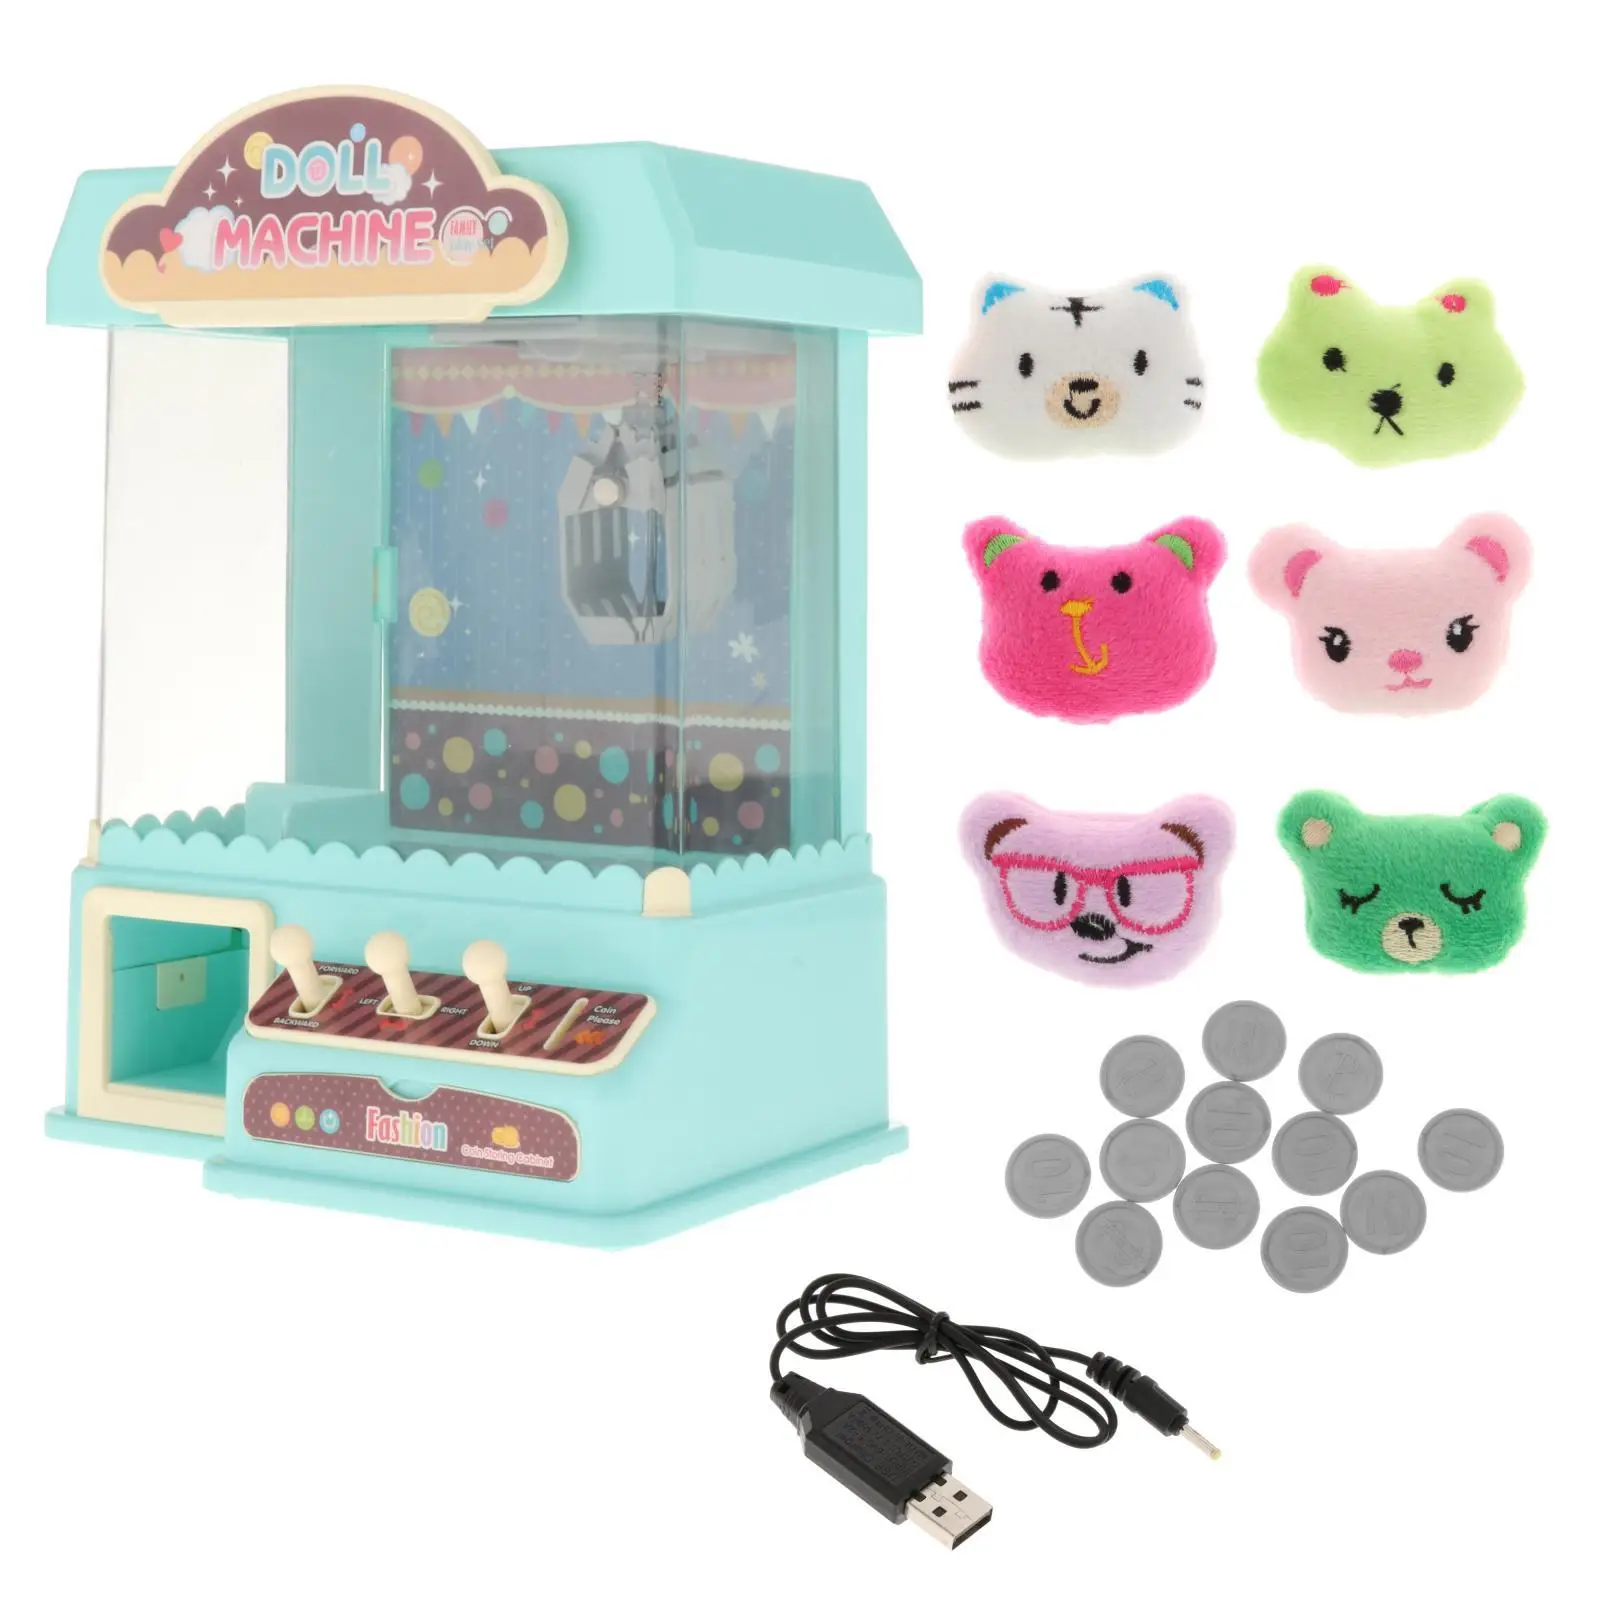 Manual Claw Machine Toy with Lights & Sounds Mini Arcade Machine for Kids